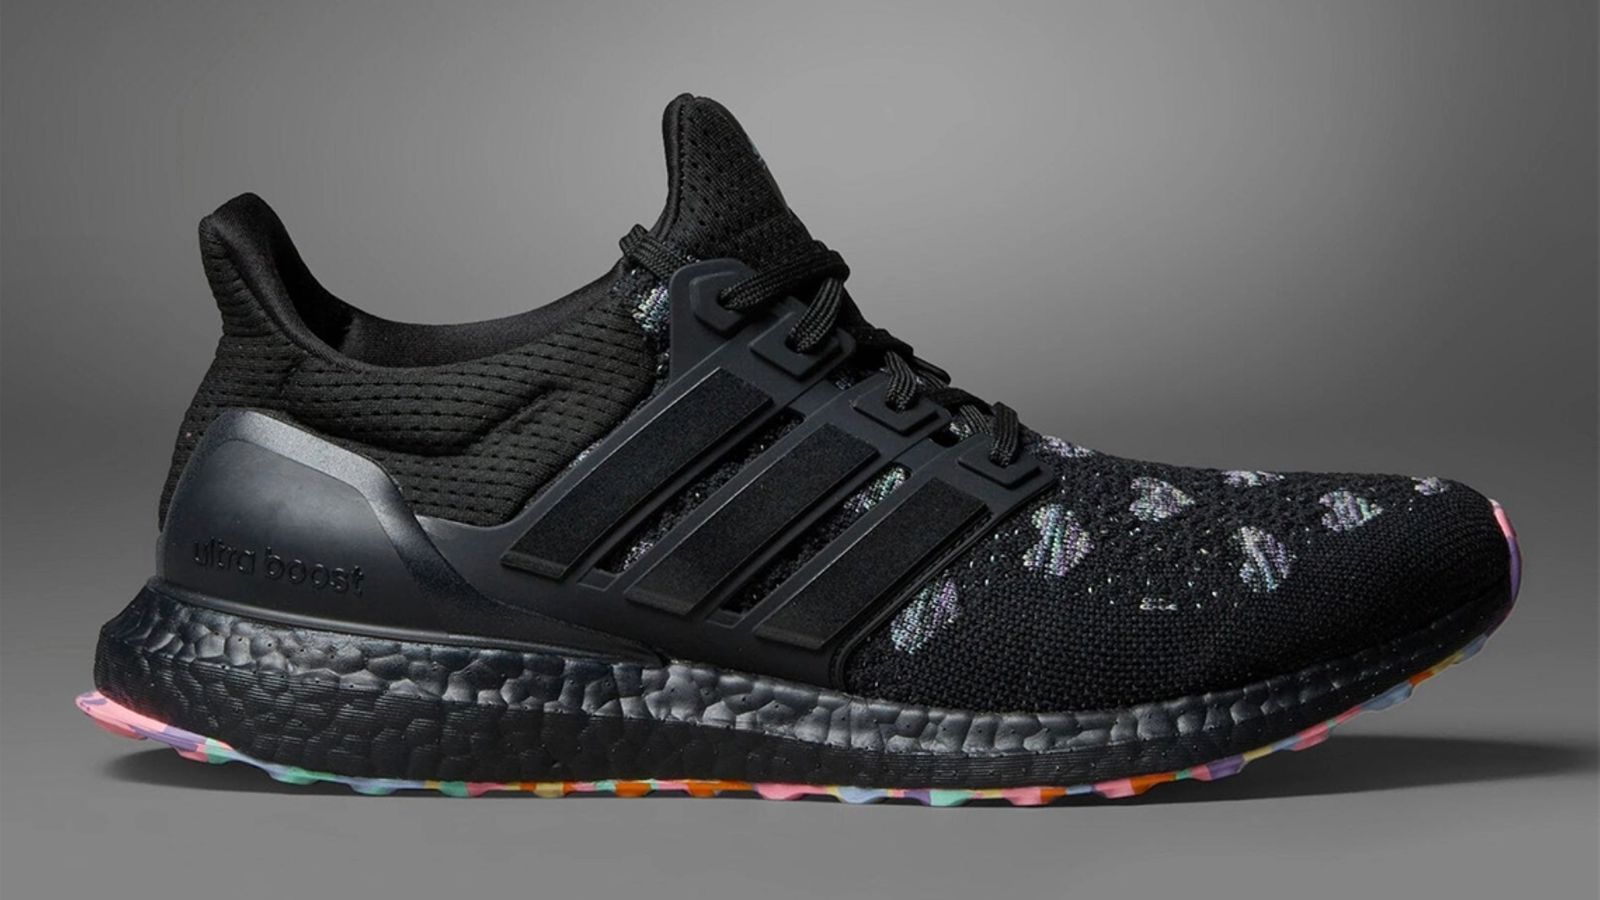 Best sneakers for Valentine's Day - adidas Ultraboost 1.0 "Valentine's Day" product image of a black sneaker with pastel colours underneath and White love hearts across the toebox.